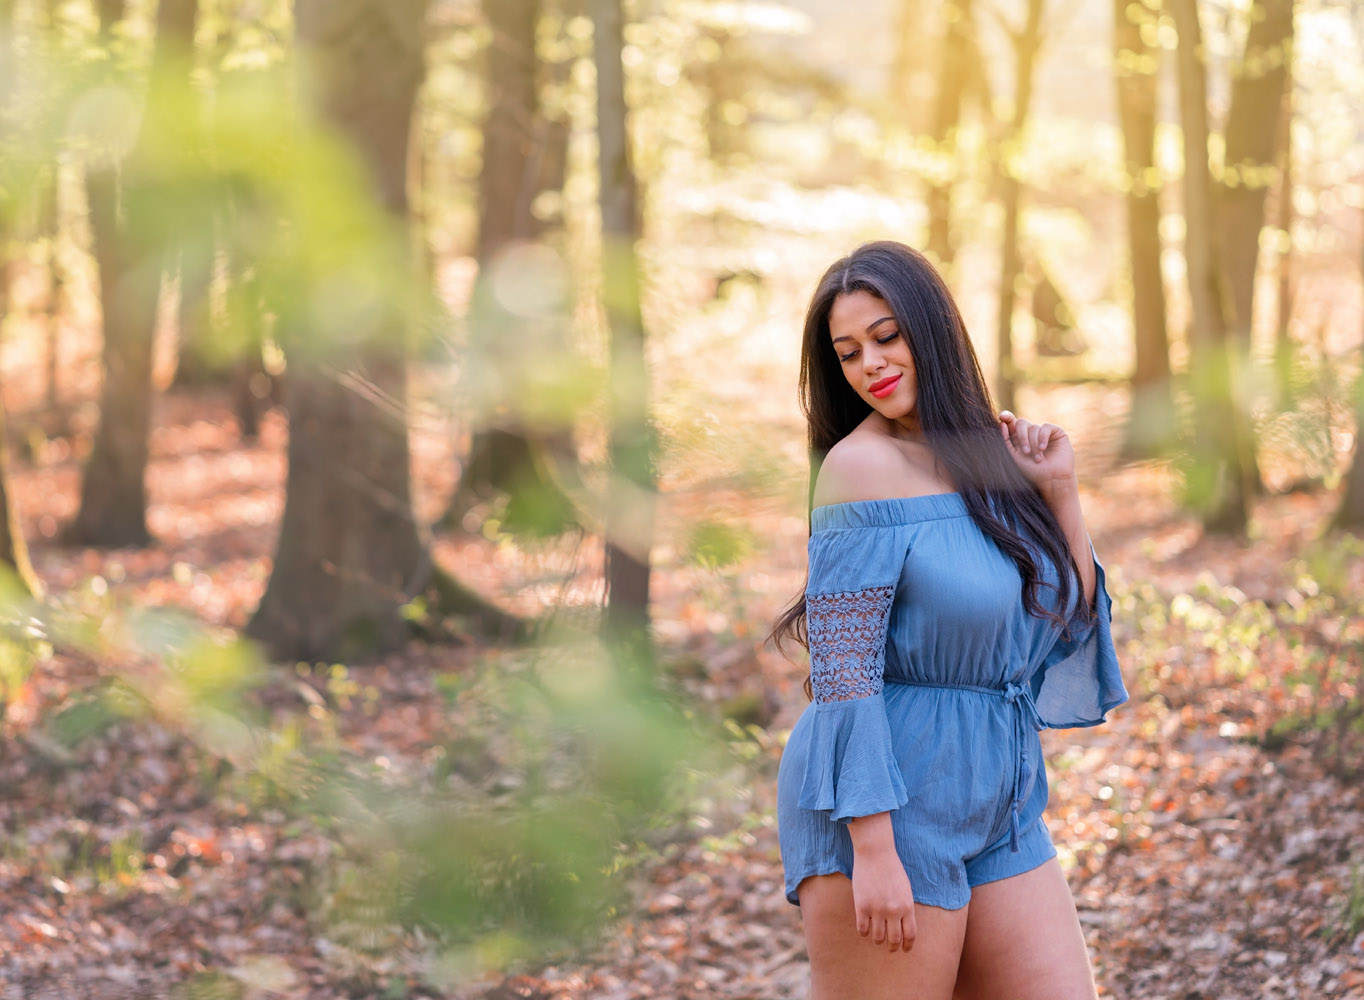  kaiserslautern Ramstein KMC Photographer beauty and portrait photography in Reichenbach-Steegen, Rheinland-Pfaly Germany. Beauty Portrait in Spring with beautiful dark hair girl in blue romper in forest by Sarah Havens 